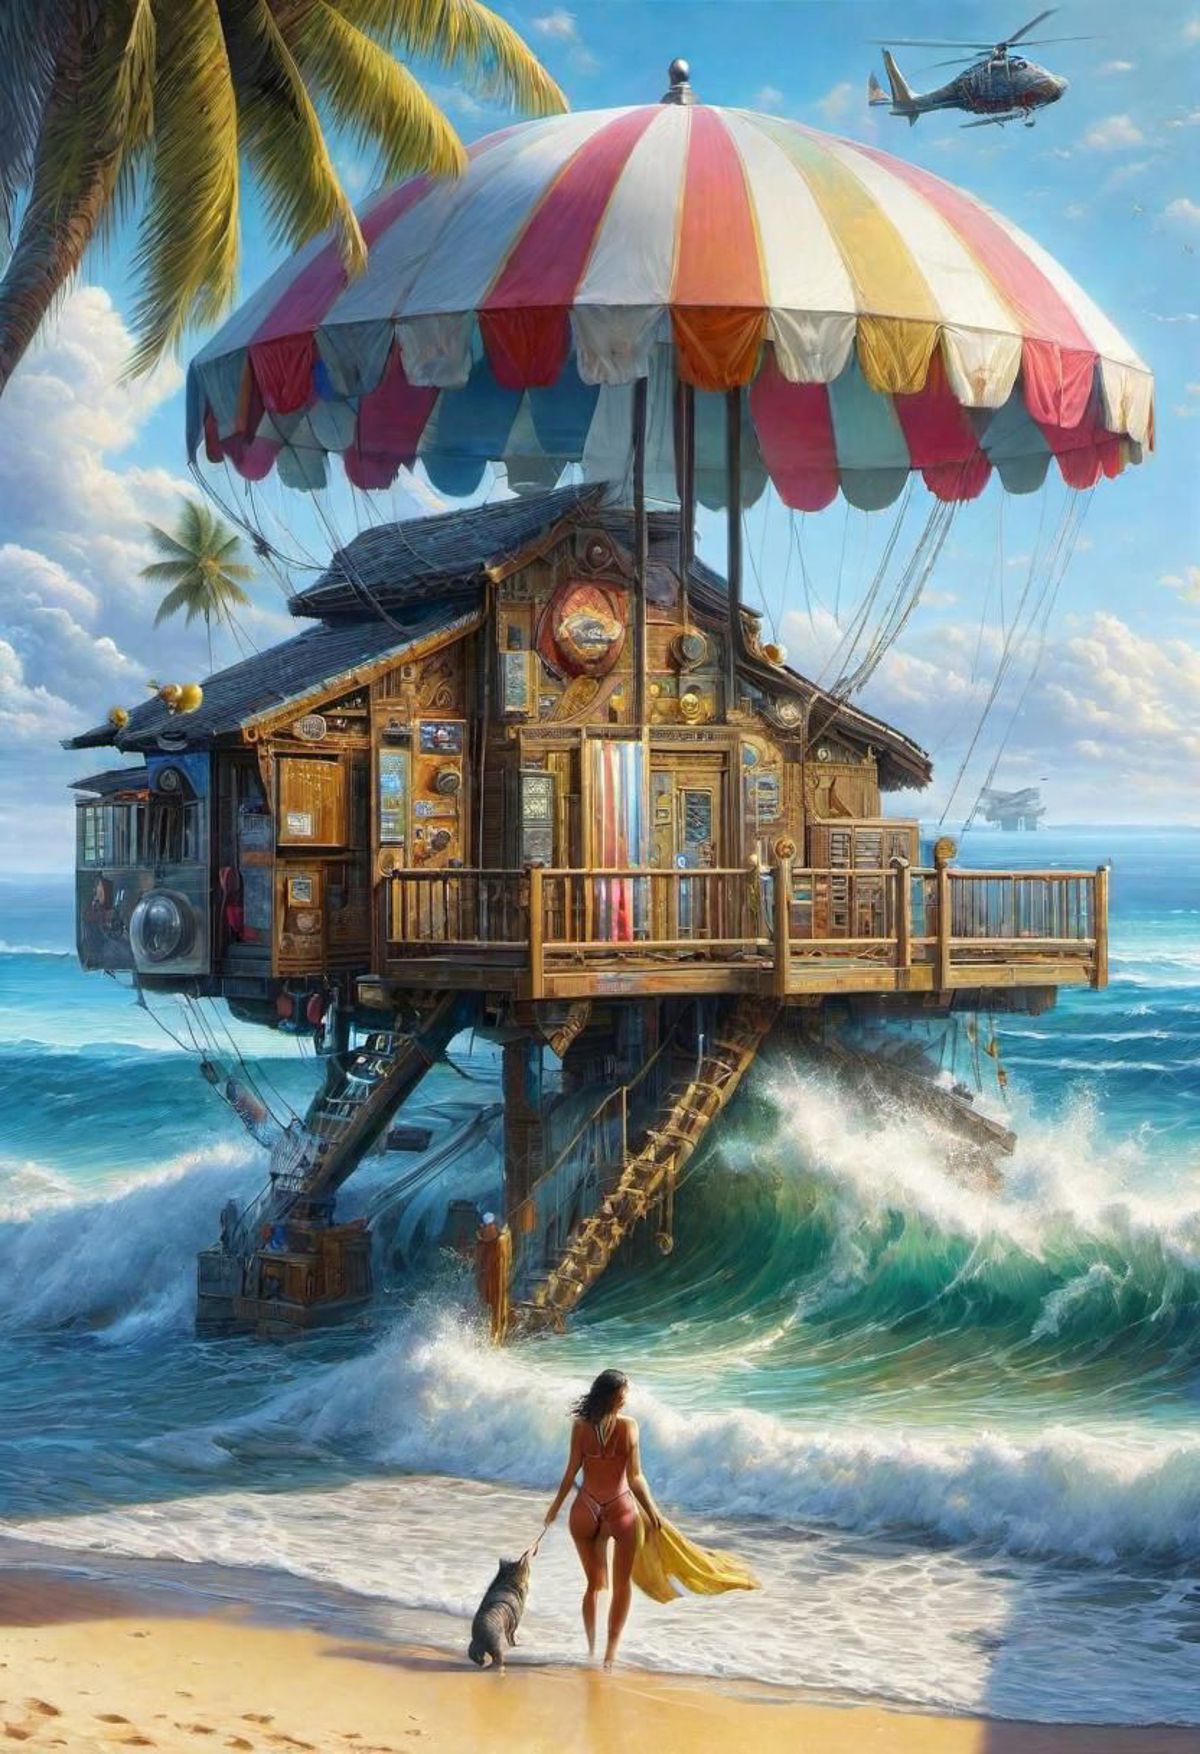 A painting of a house on stilts in the water with a woman standing in the water in front of it.